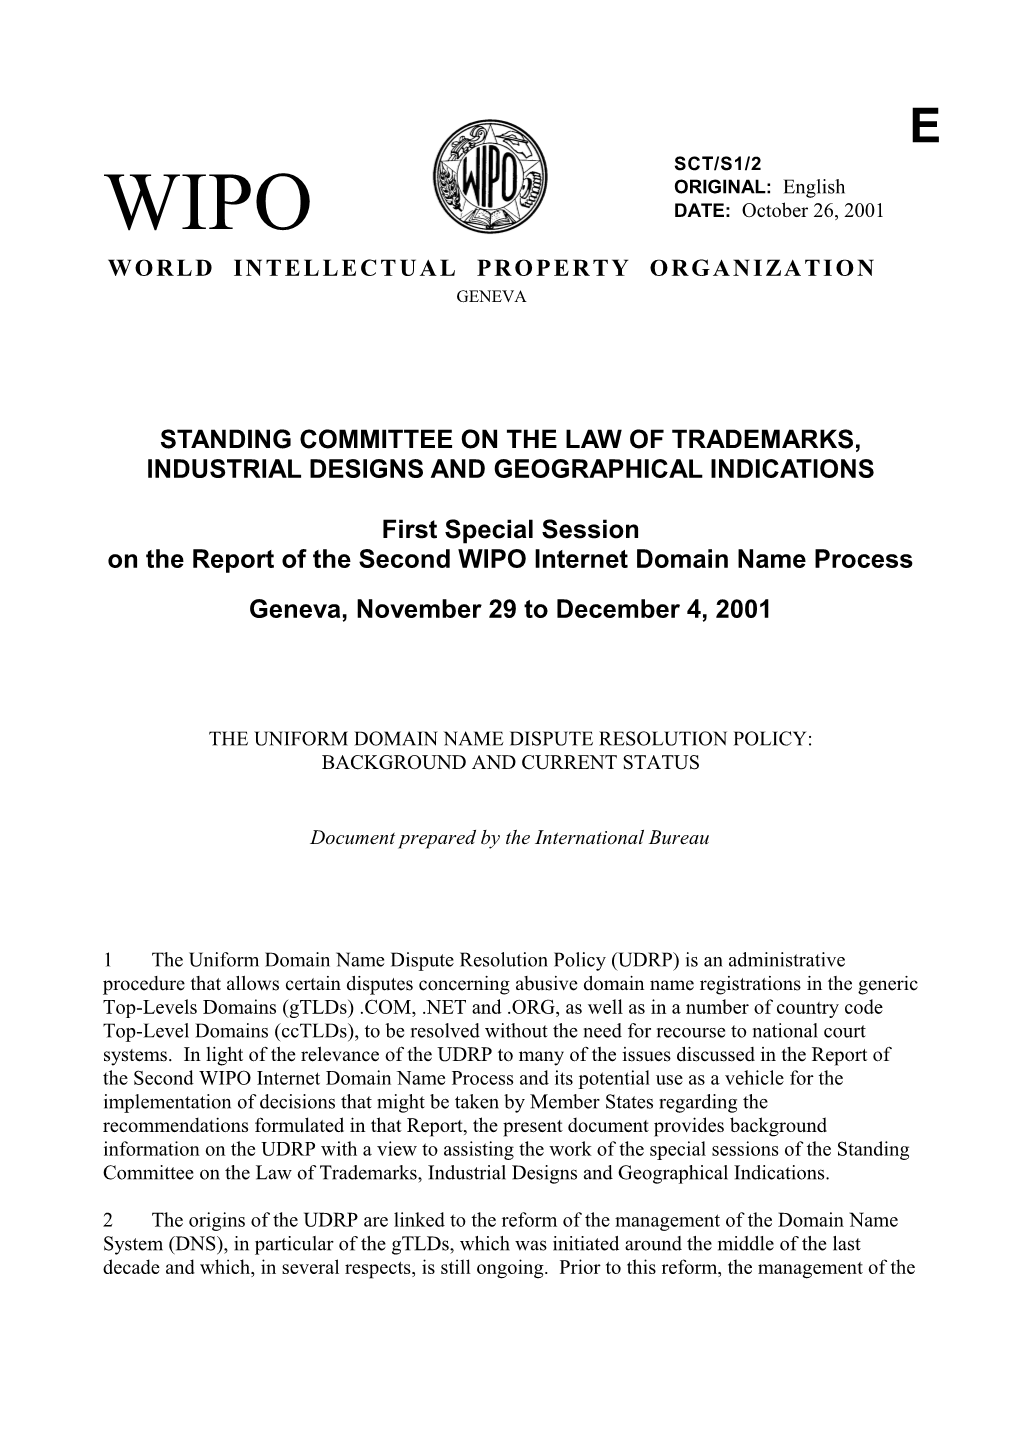 SCT/S1/2: the Uniform Domain Name Dispute Resolution Policy: Background and Current Status